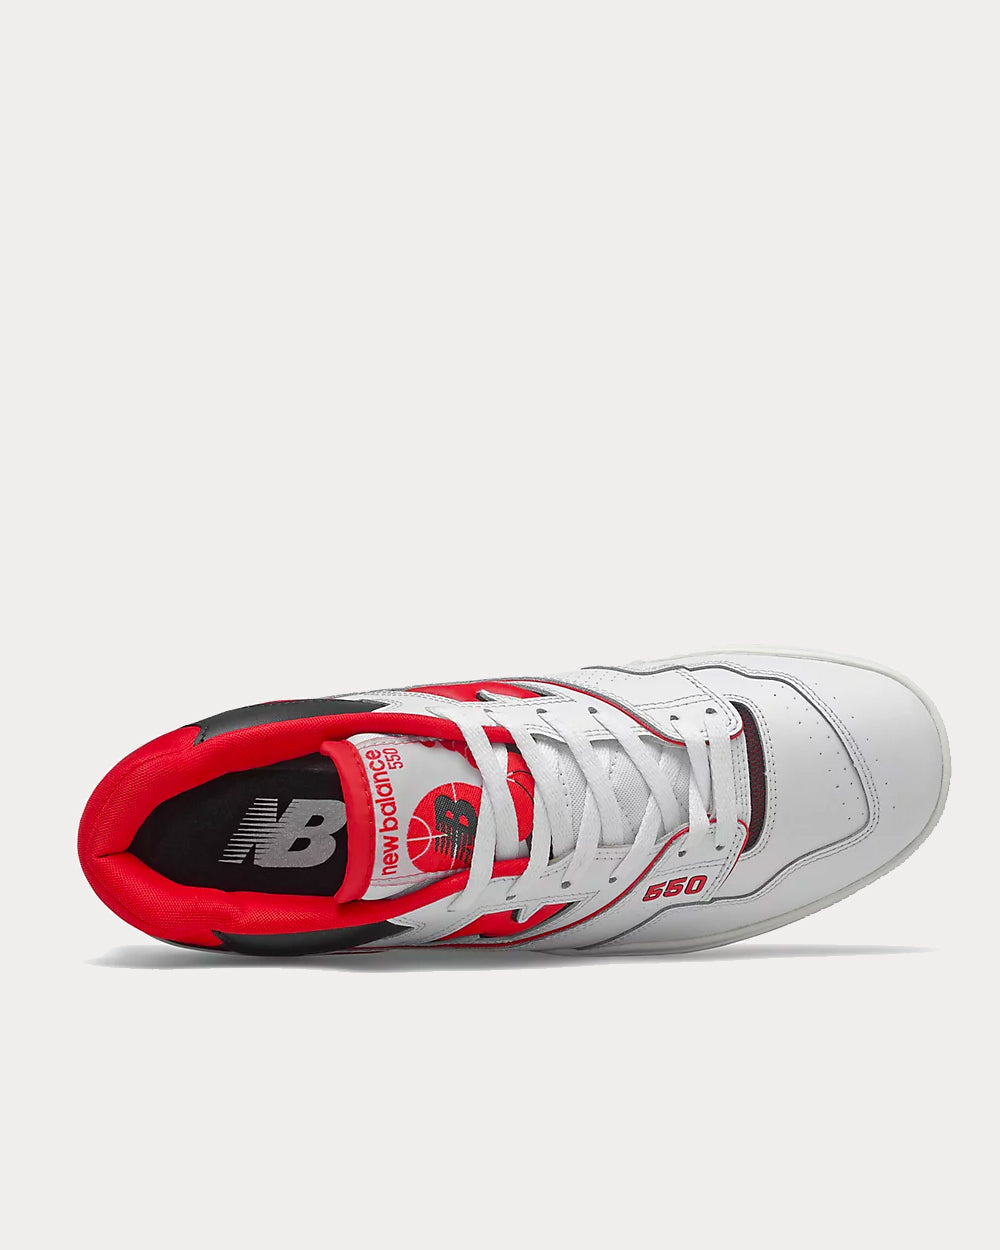 New Balance - 550 Red & White Low Top Sneakers